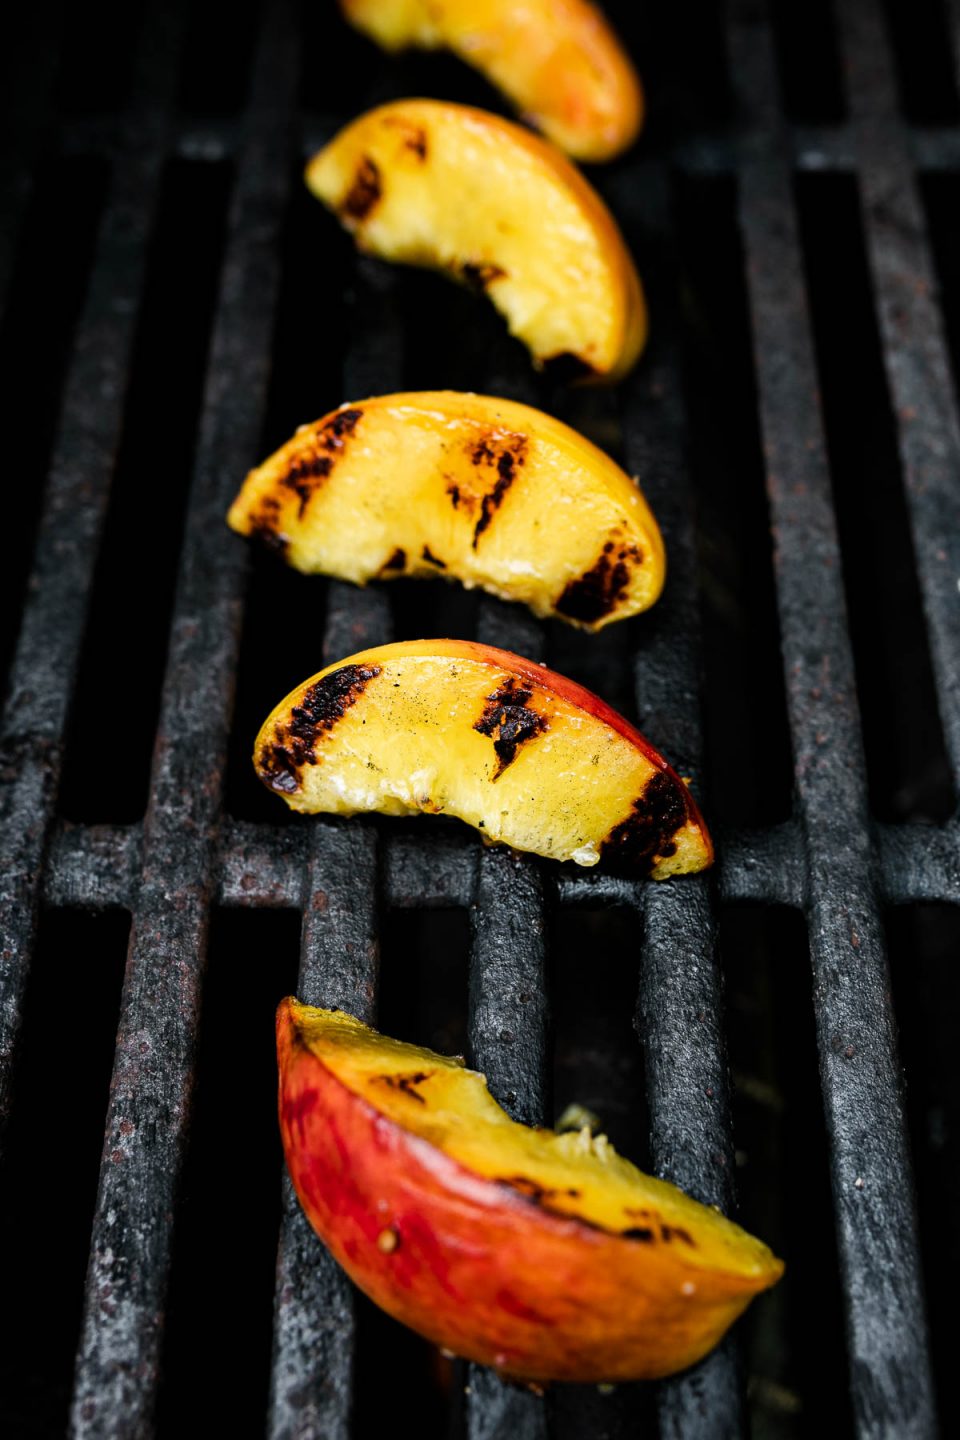 Grilled peach slices directly on grill grates.